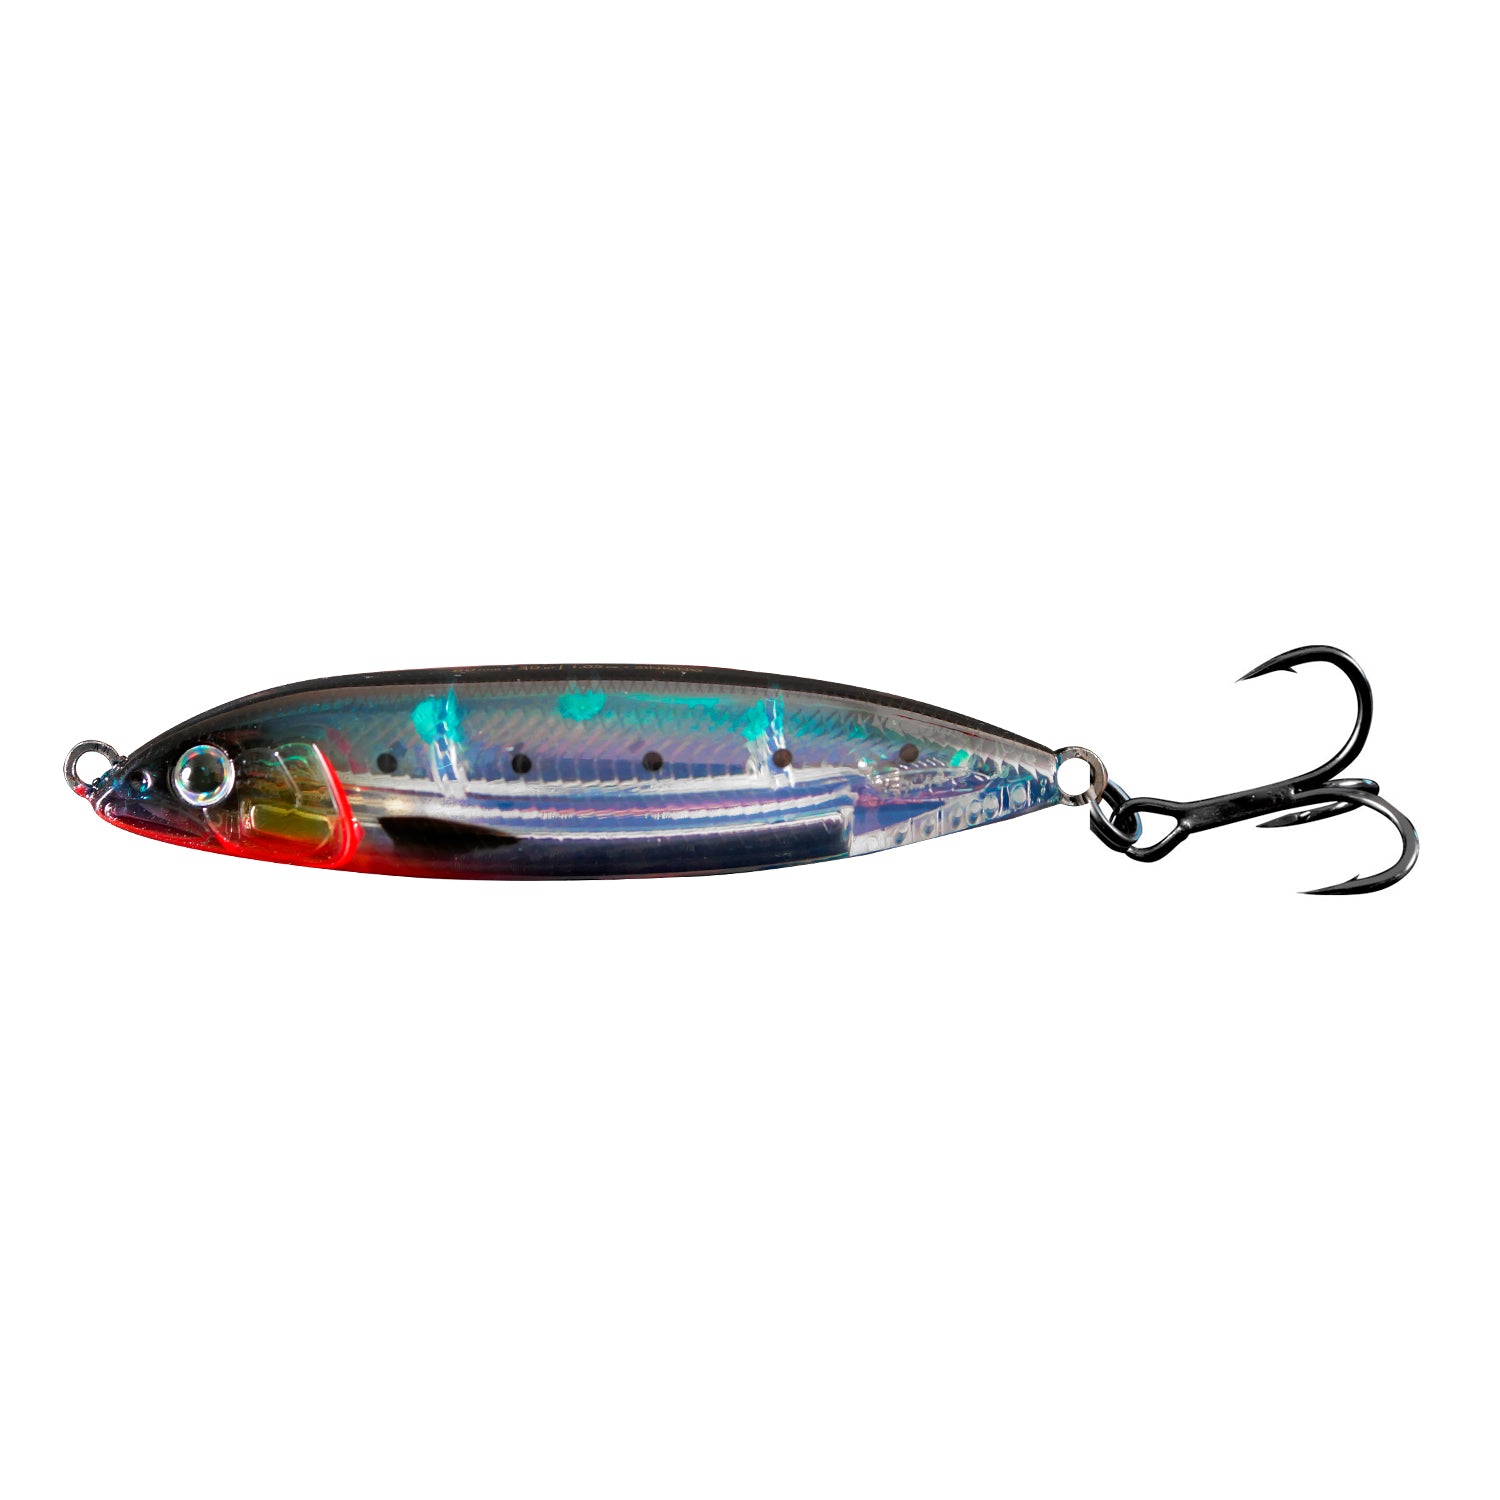 Fishus Lures Lurenzo Wobly Fishing Lure 62mm 16 gr